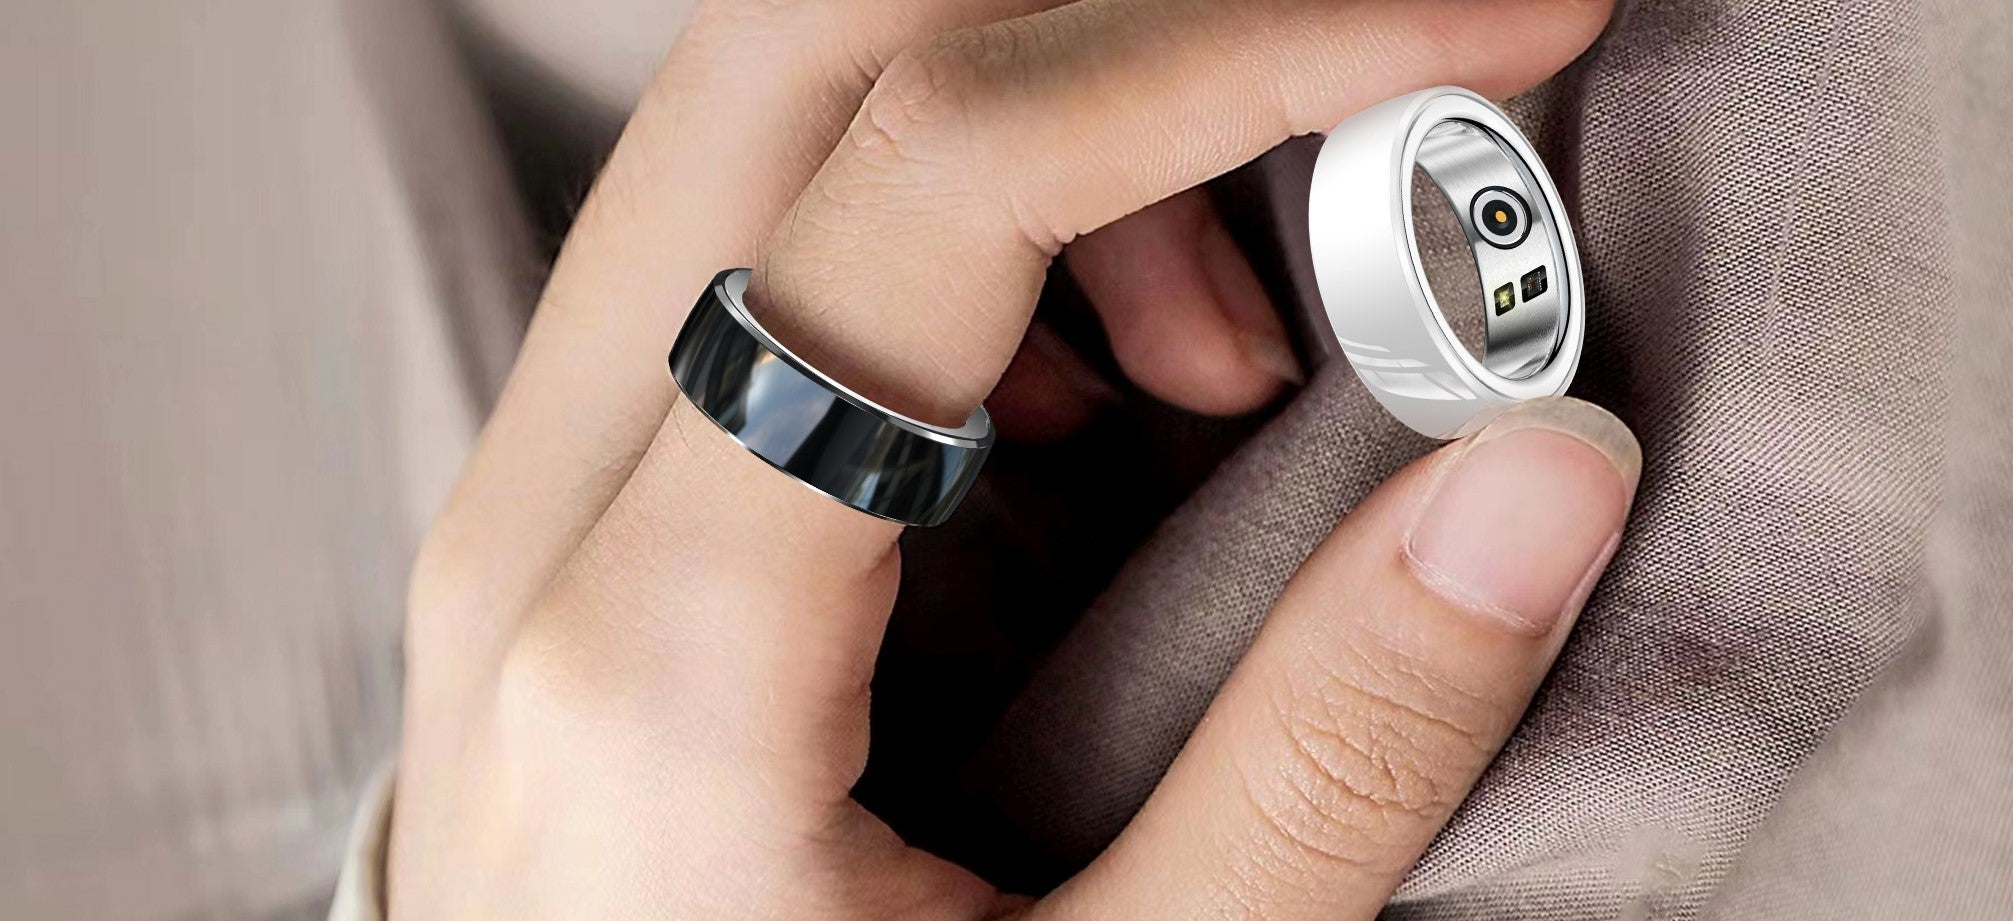 Pi Ring Pro - A Smart Health Ring with Sleep Monitoring – Pi Ring - India's  First Smart Ring for Fitness, Stress, Sleep & Health.